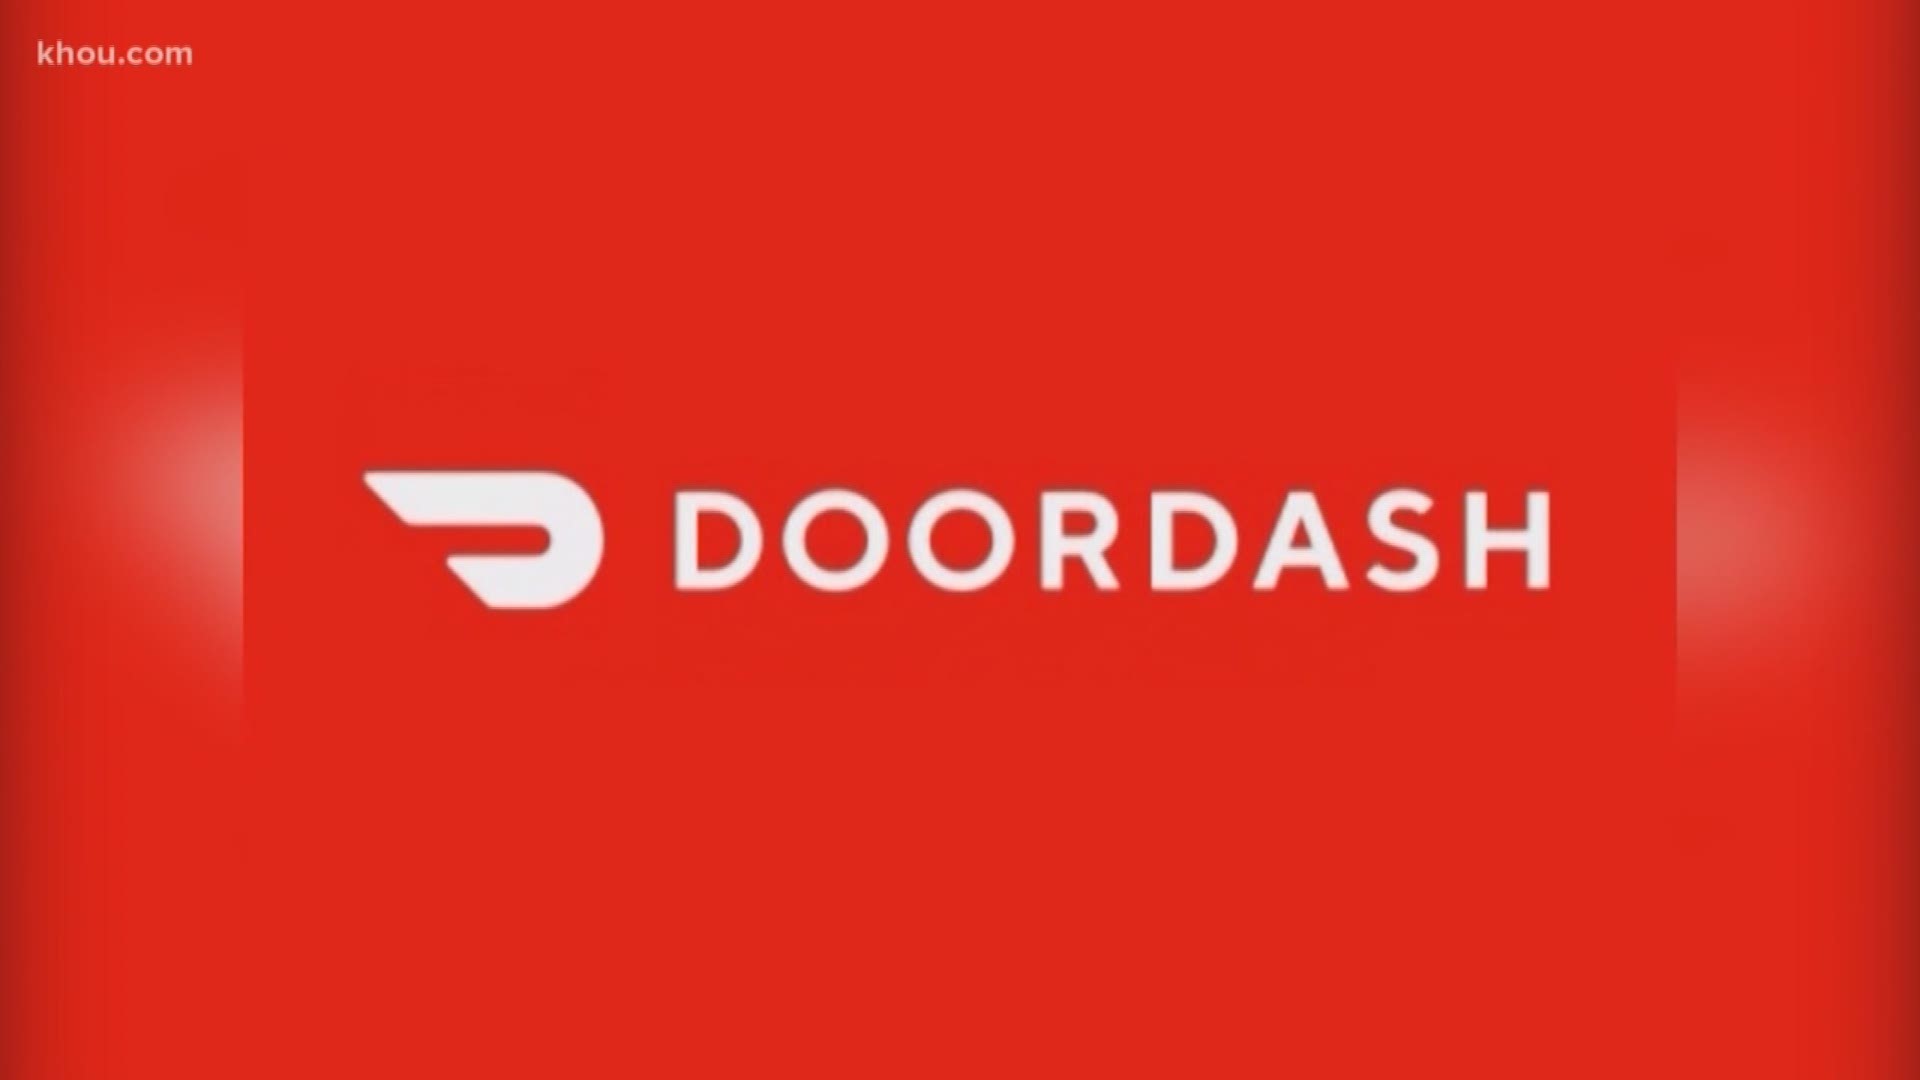 The food delivery service DoorDash announced Thursday that approximately 4.9 million consumers, drivers, and merchants were hacked on May 4, 2019.